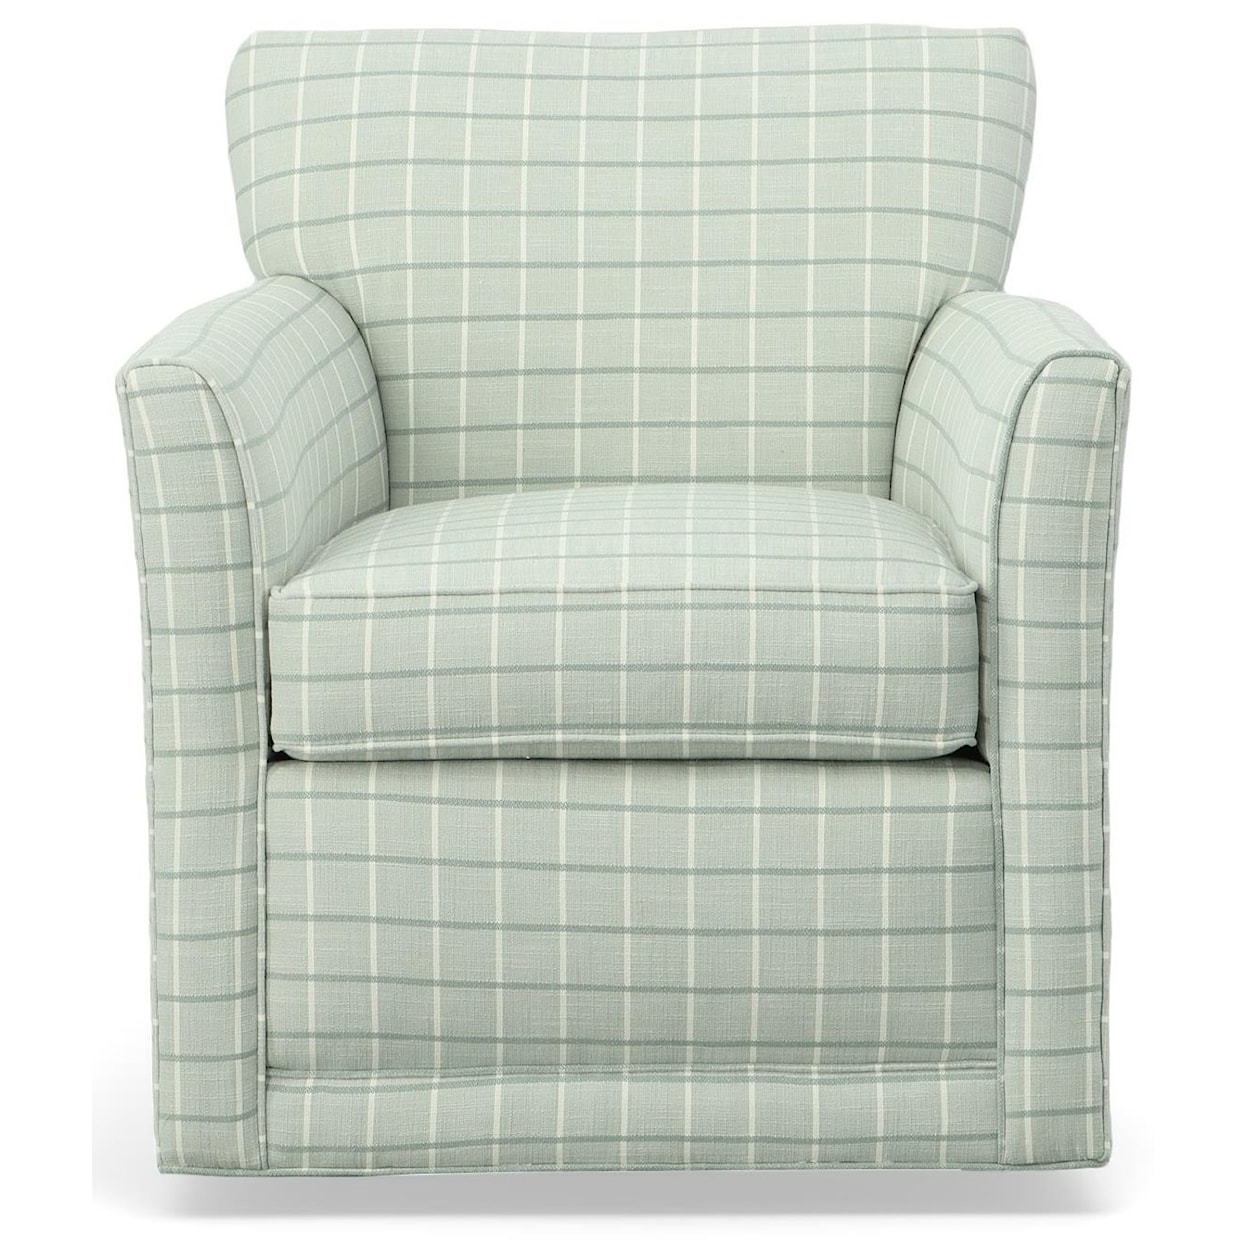 Rowe Chairs and Accents Swivel Chair